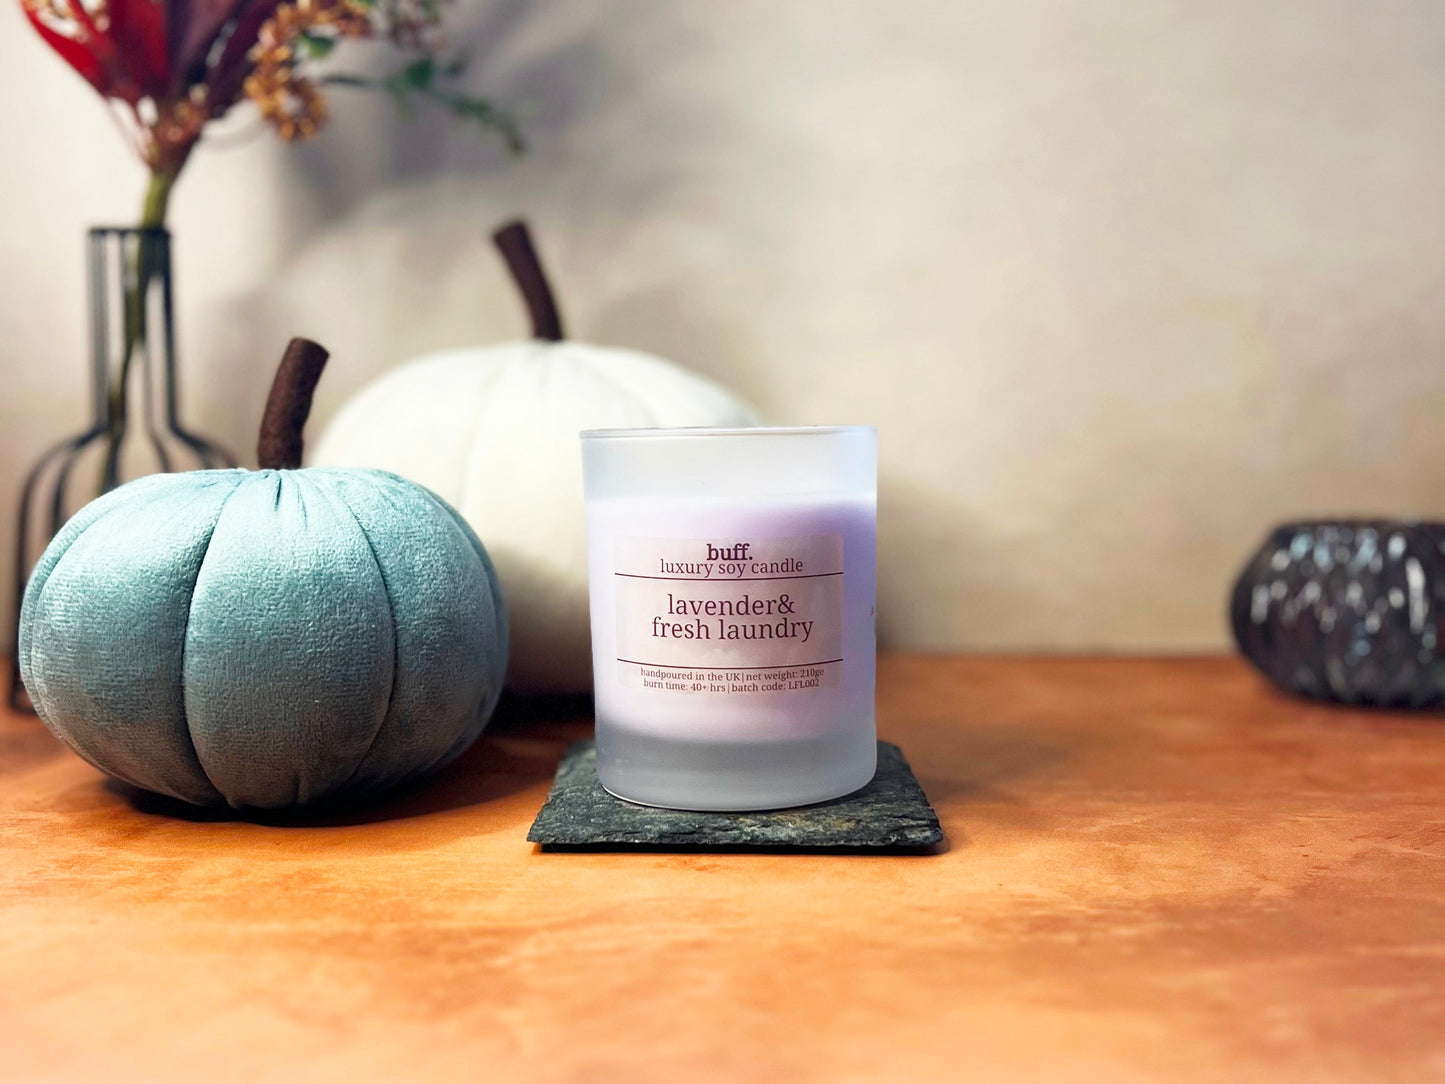 Lavender and Fresh Laundry soy wax candle in frosted glass